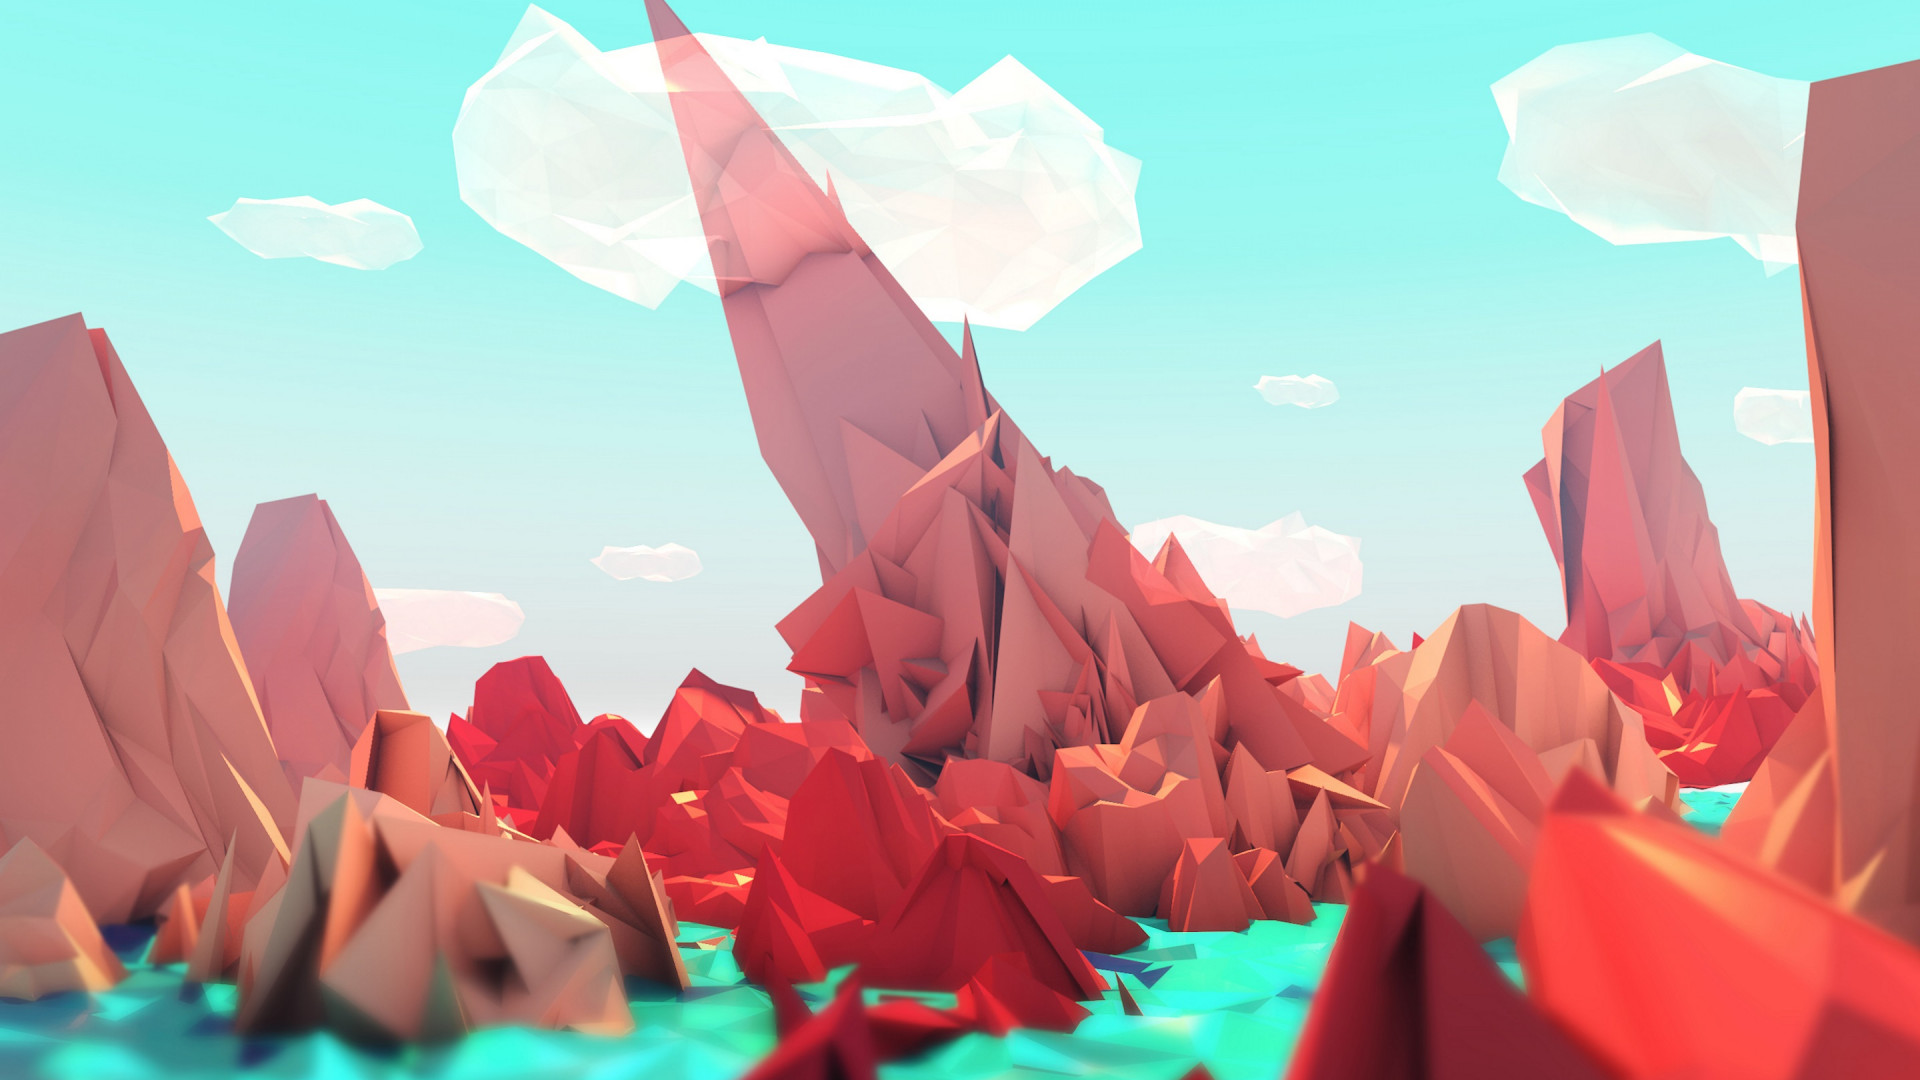 The red mountains. Low poly illustration wallpaper 1920x1080